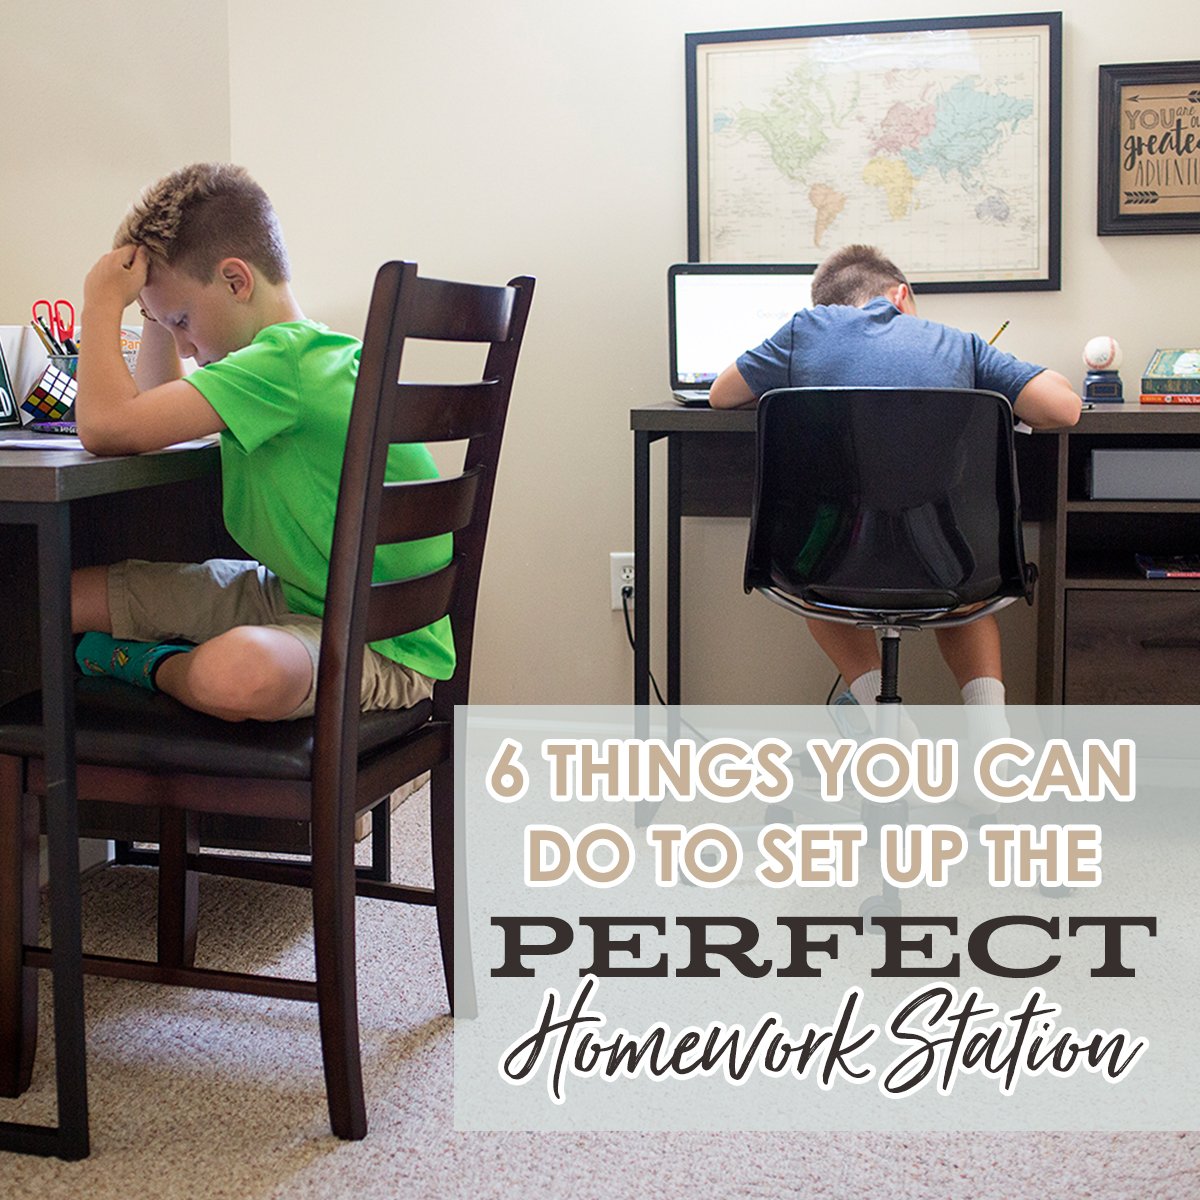 https://dailymom.com/portal/wp-content/uploads/2017/10/6-Things-You-Can-Do-to-Set-Up-the-Perfect-Homework-Station-pin.jpg